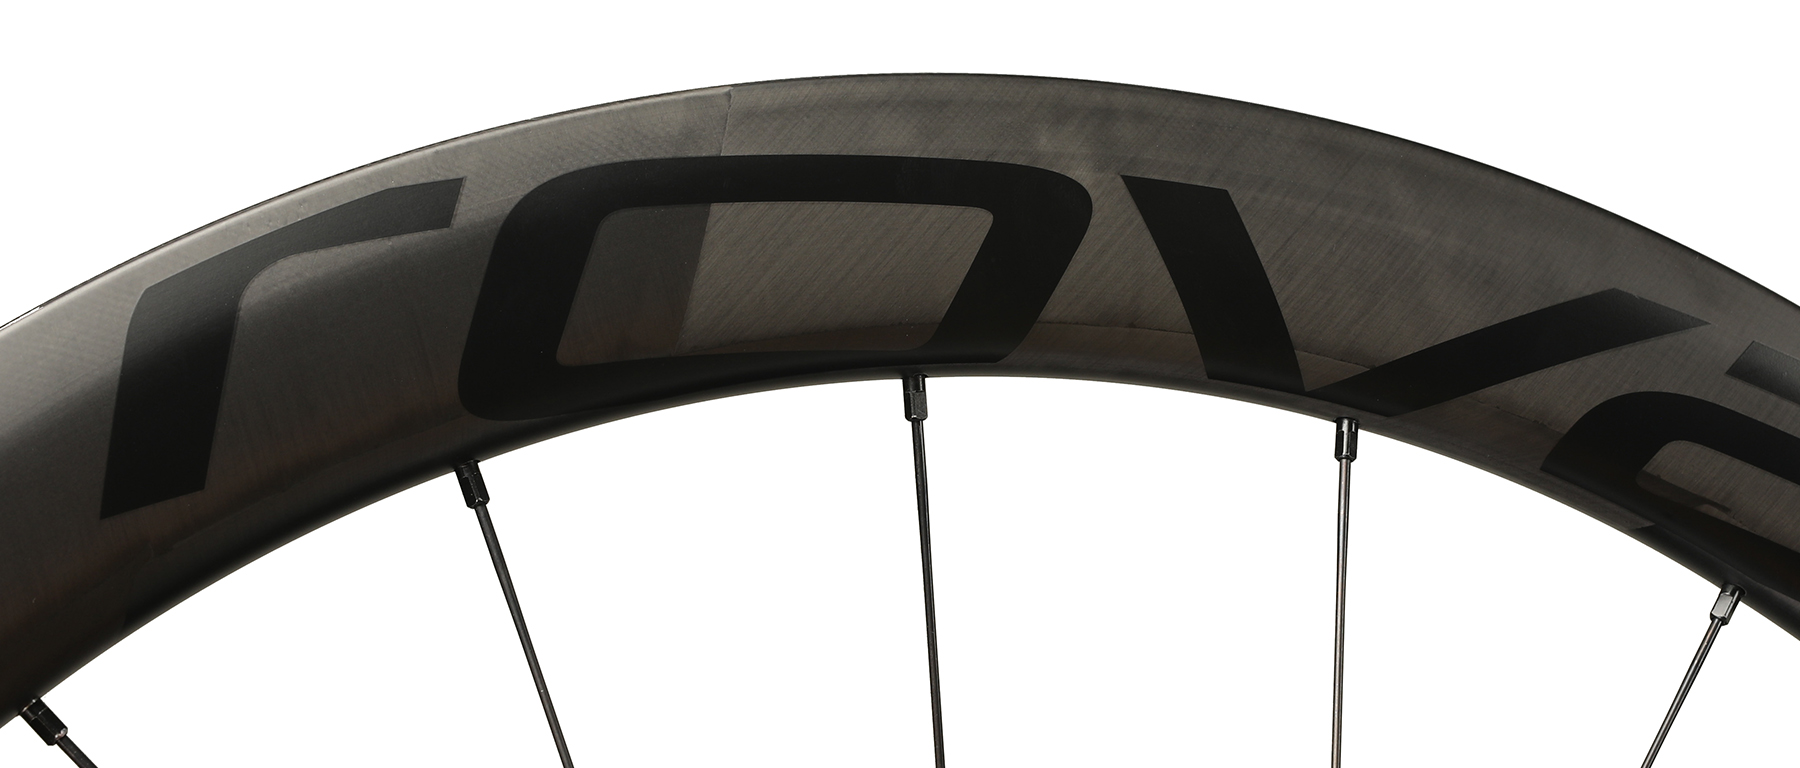 Roval Rapide CL 50 Disc Wheelset Excel Sports | Shop Online From 